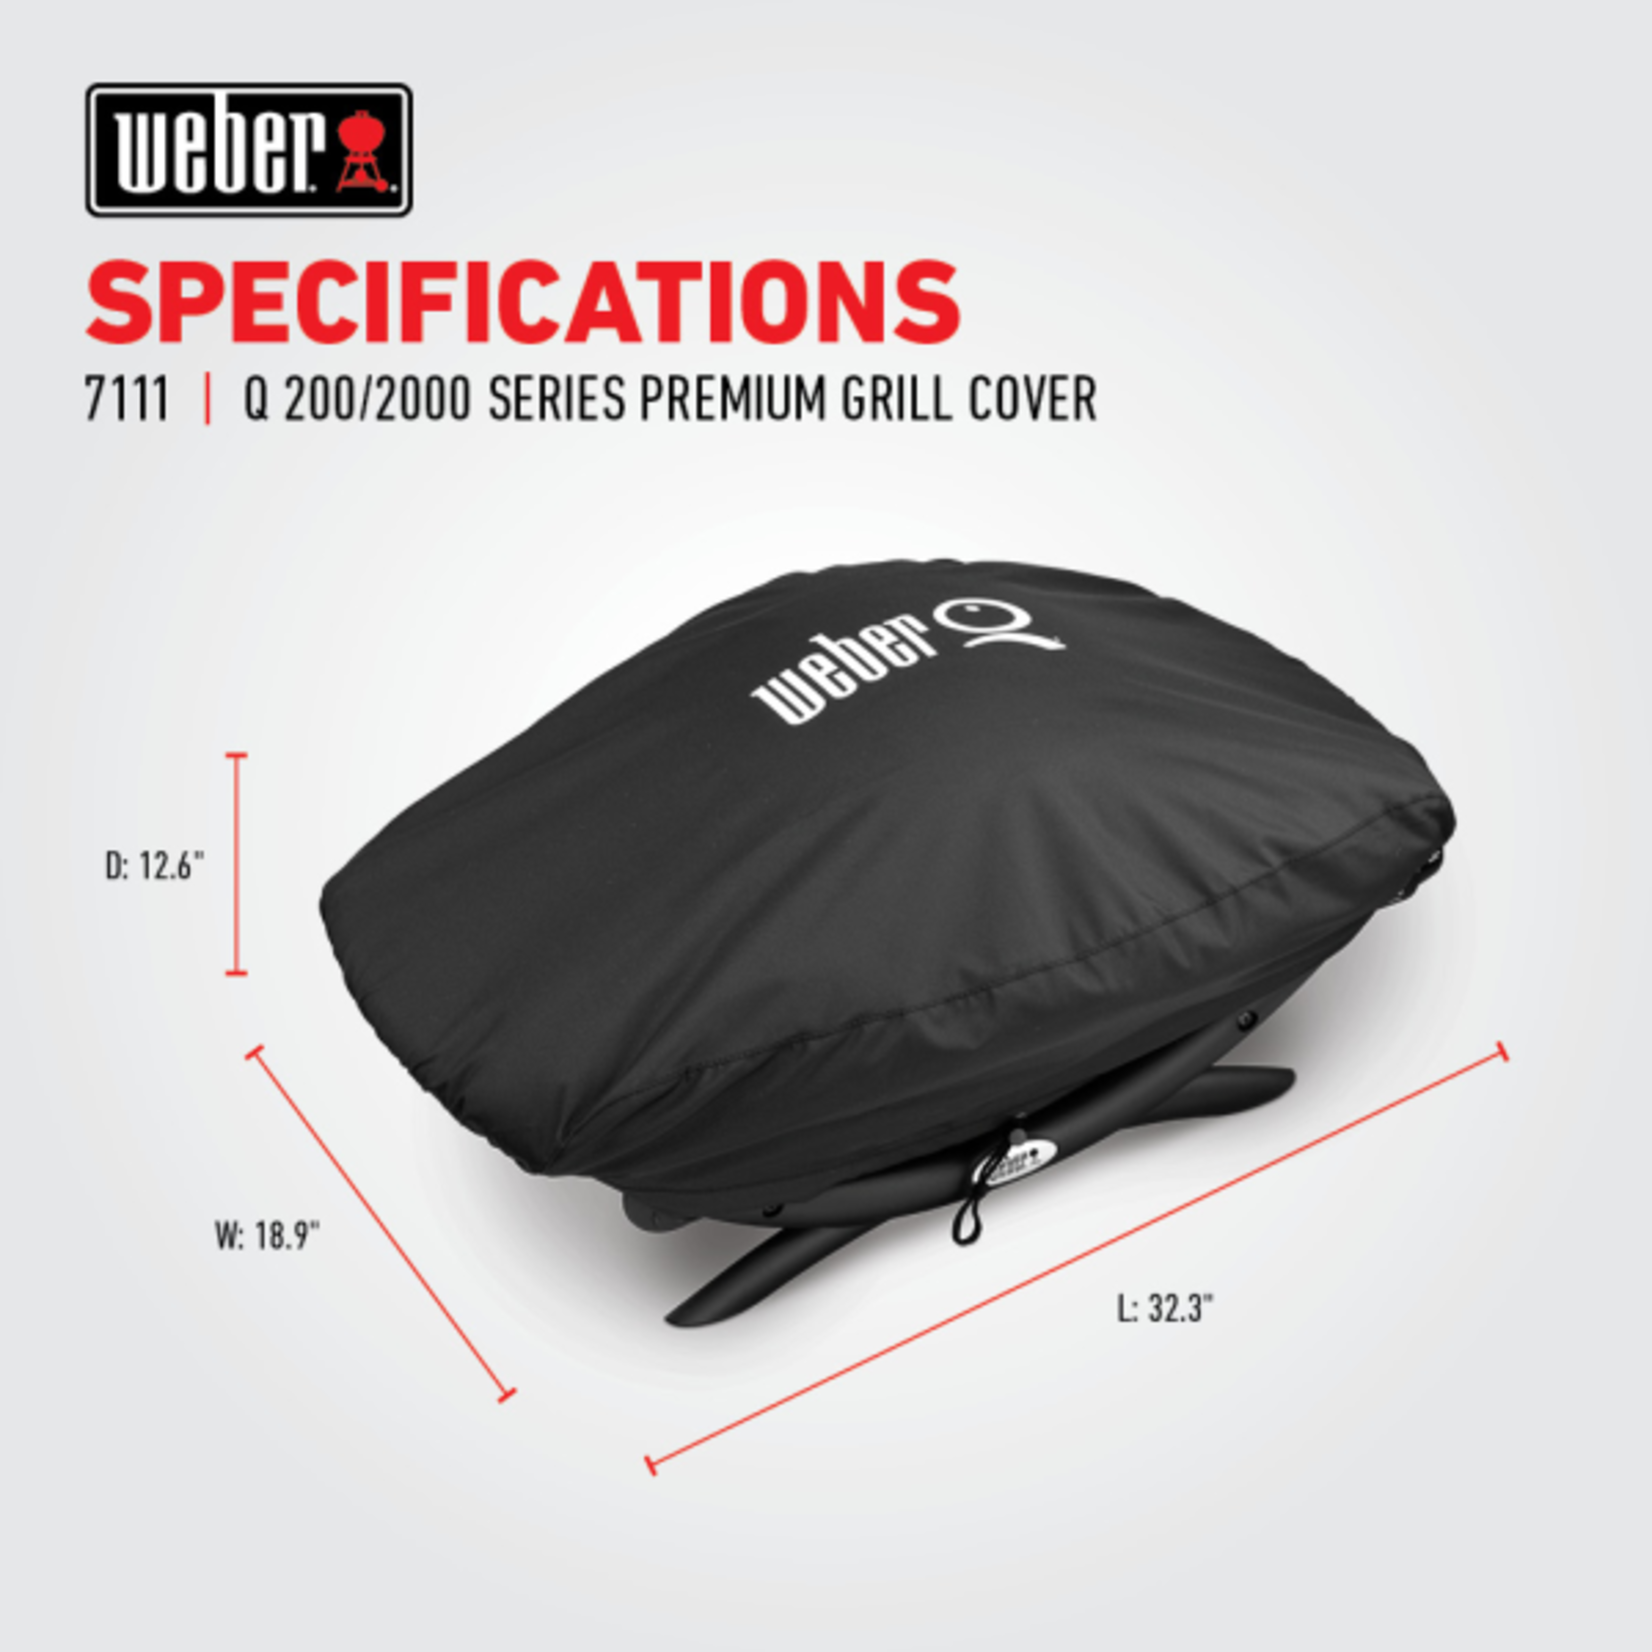 Weber Grill Cover - Fits Q 200/2000 series (4)